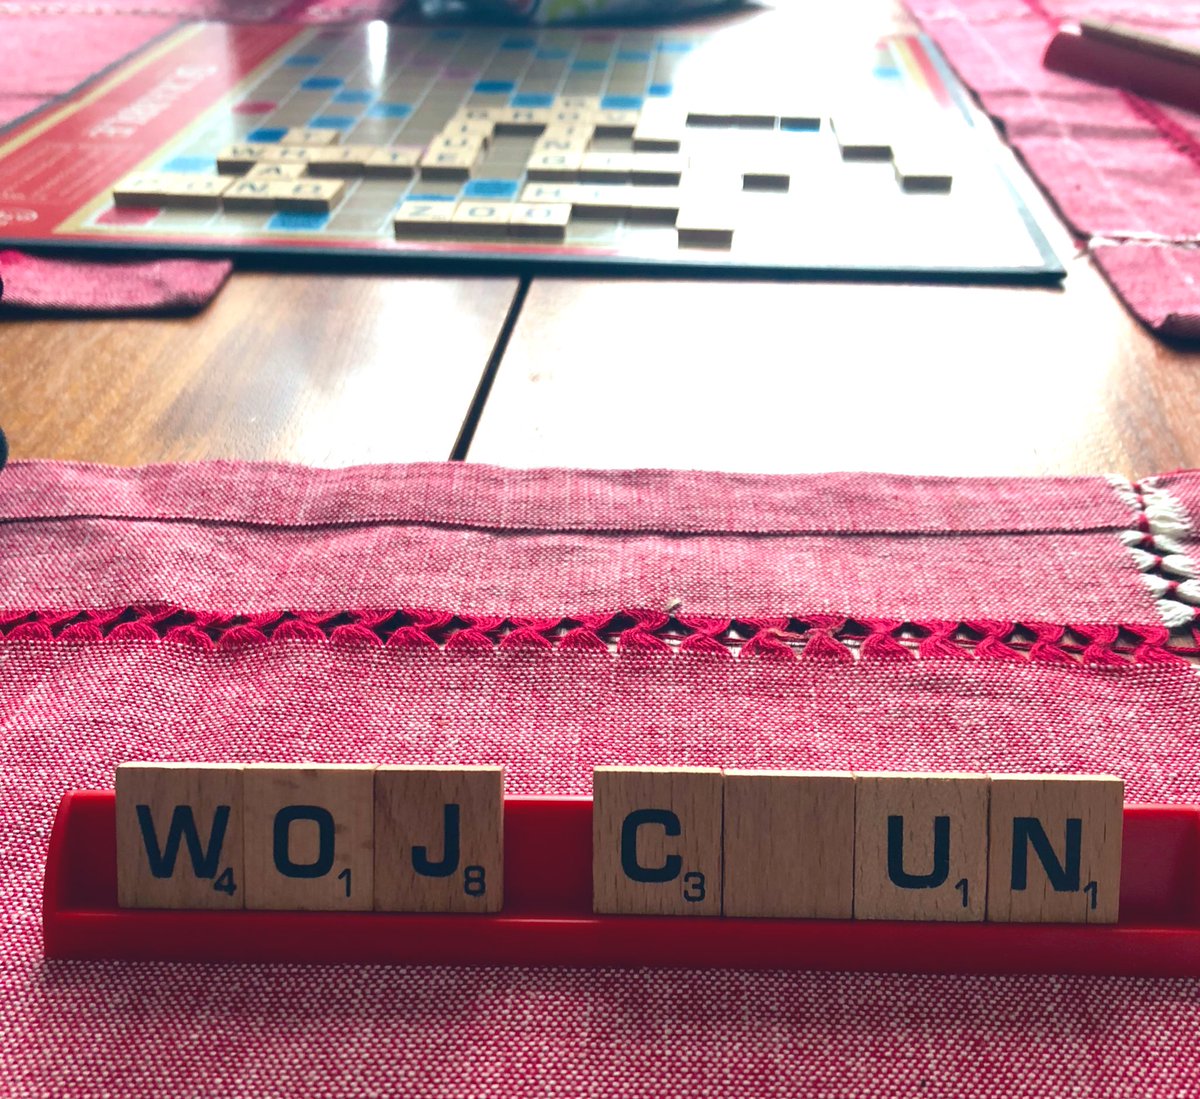 Playing scrabble. I think Woj should for sure be a word. I’m gonna try it! @wojespn #wojbomb #scrabble https://t.co/NrOnXLTc44